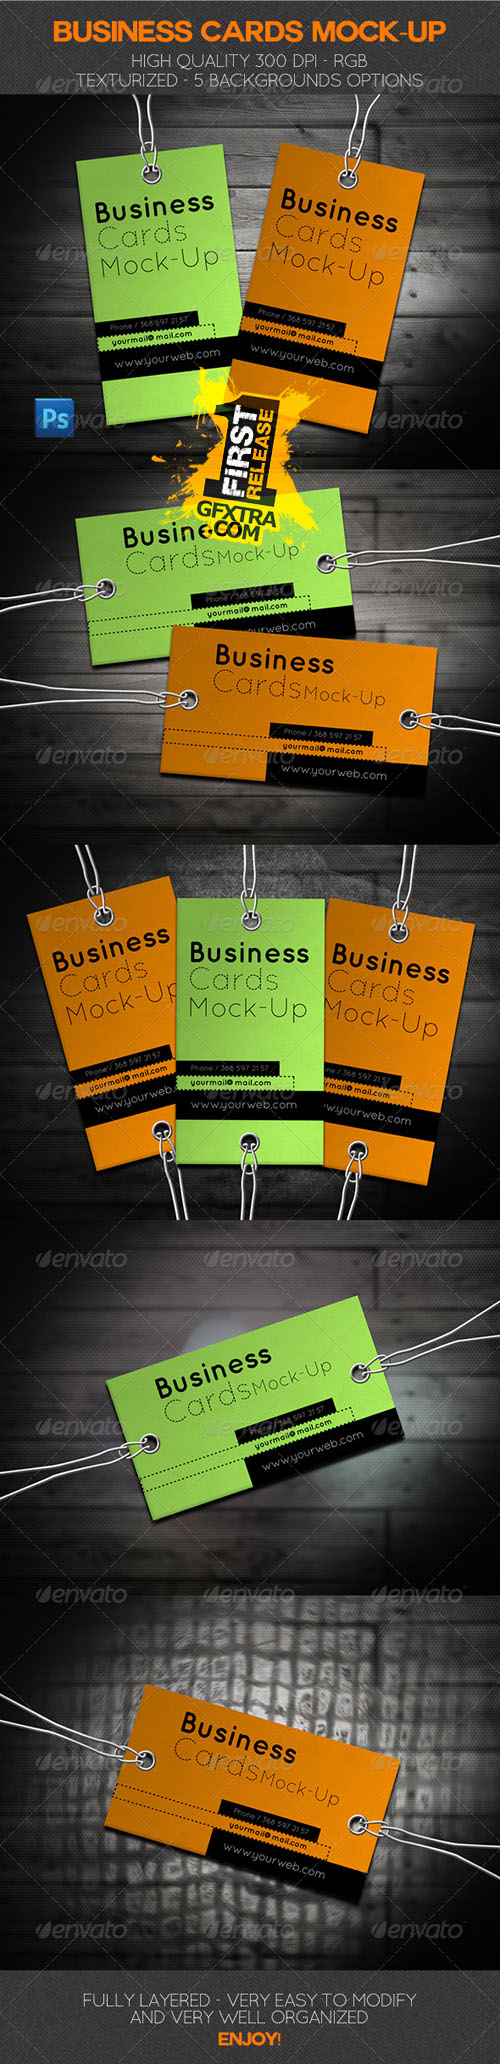 GraphicRiver: Business Cards Mock-Up